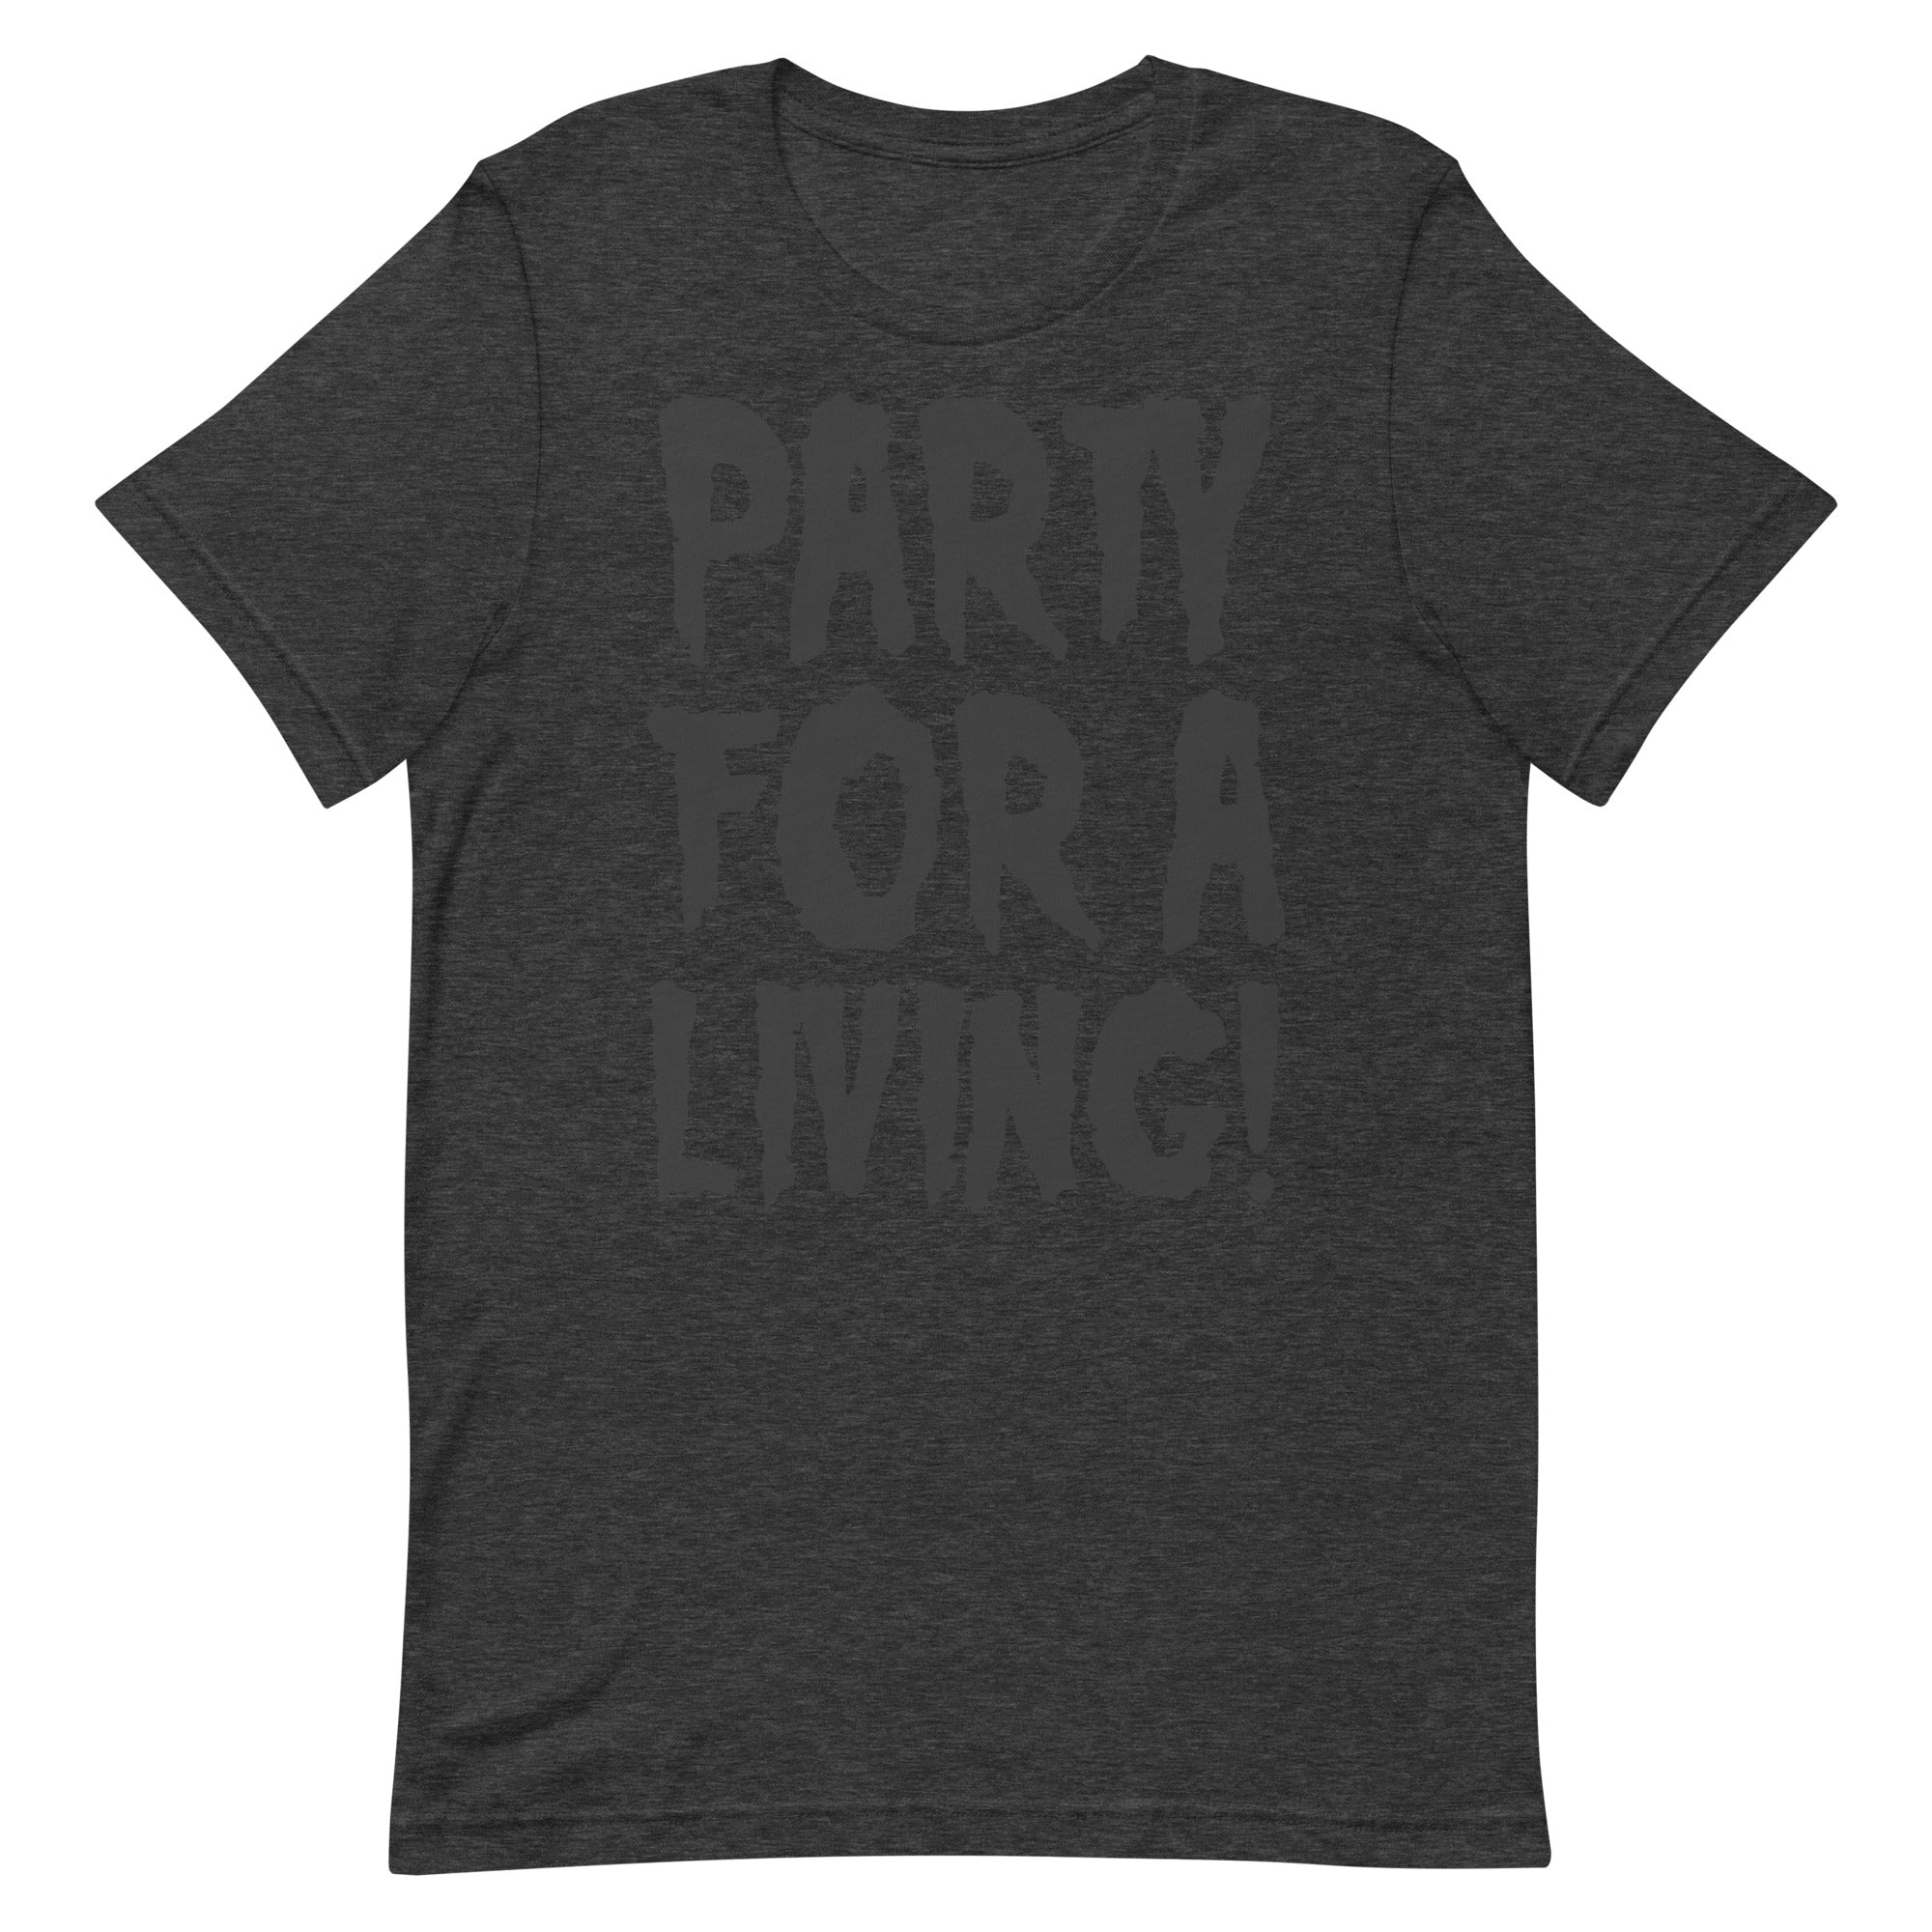 Party For A Living Misfit Shirt